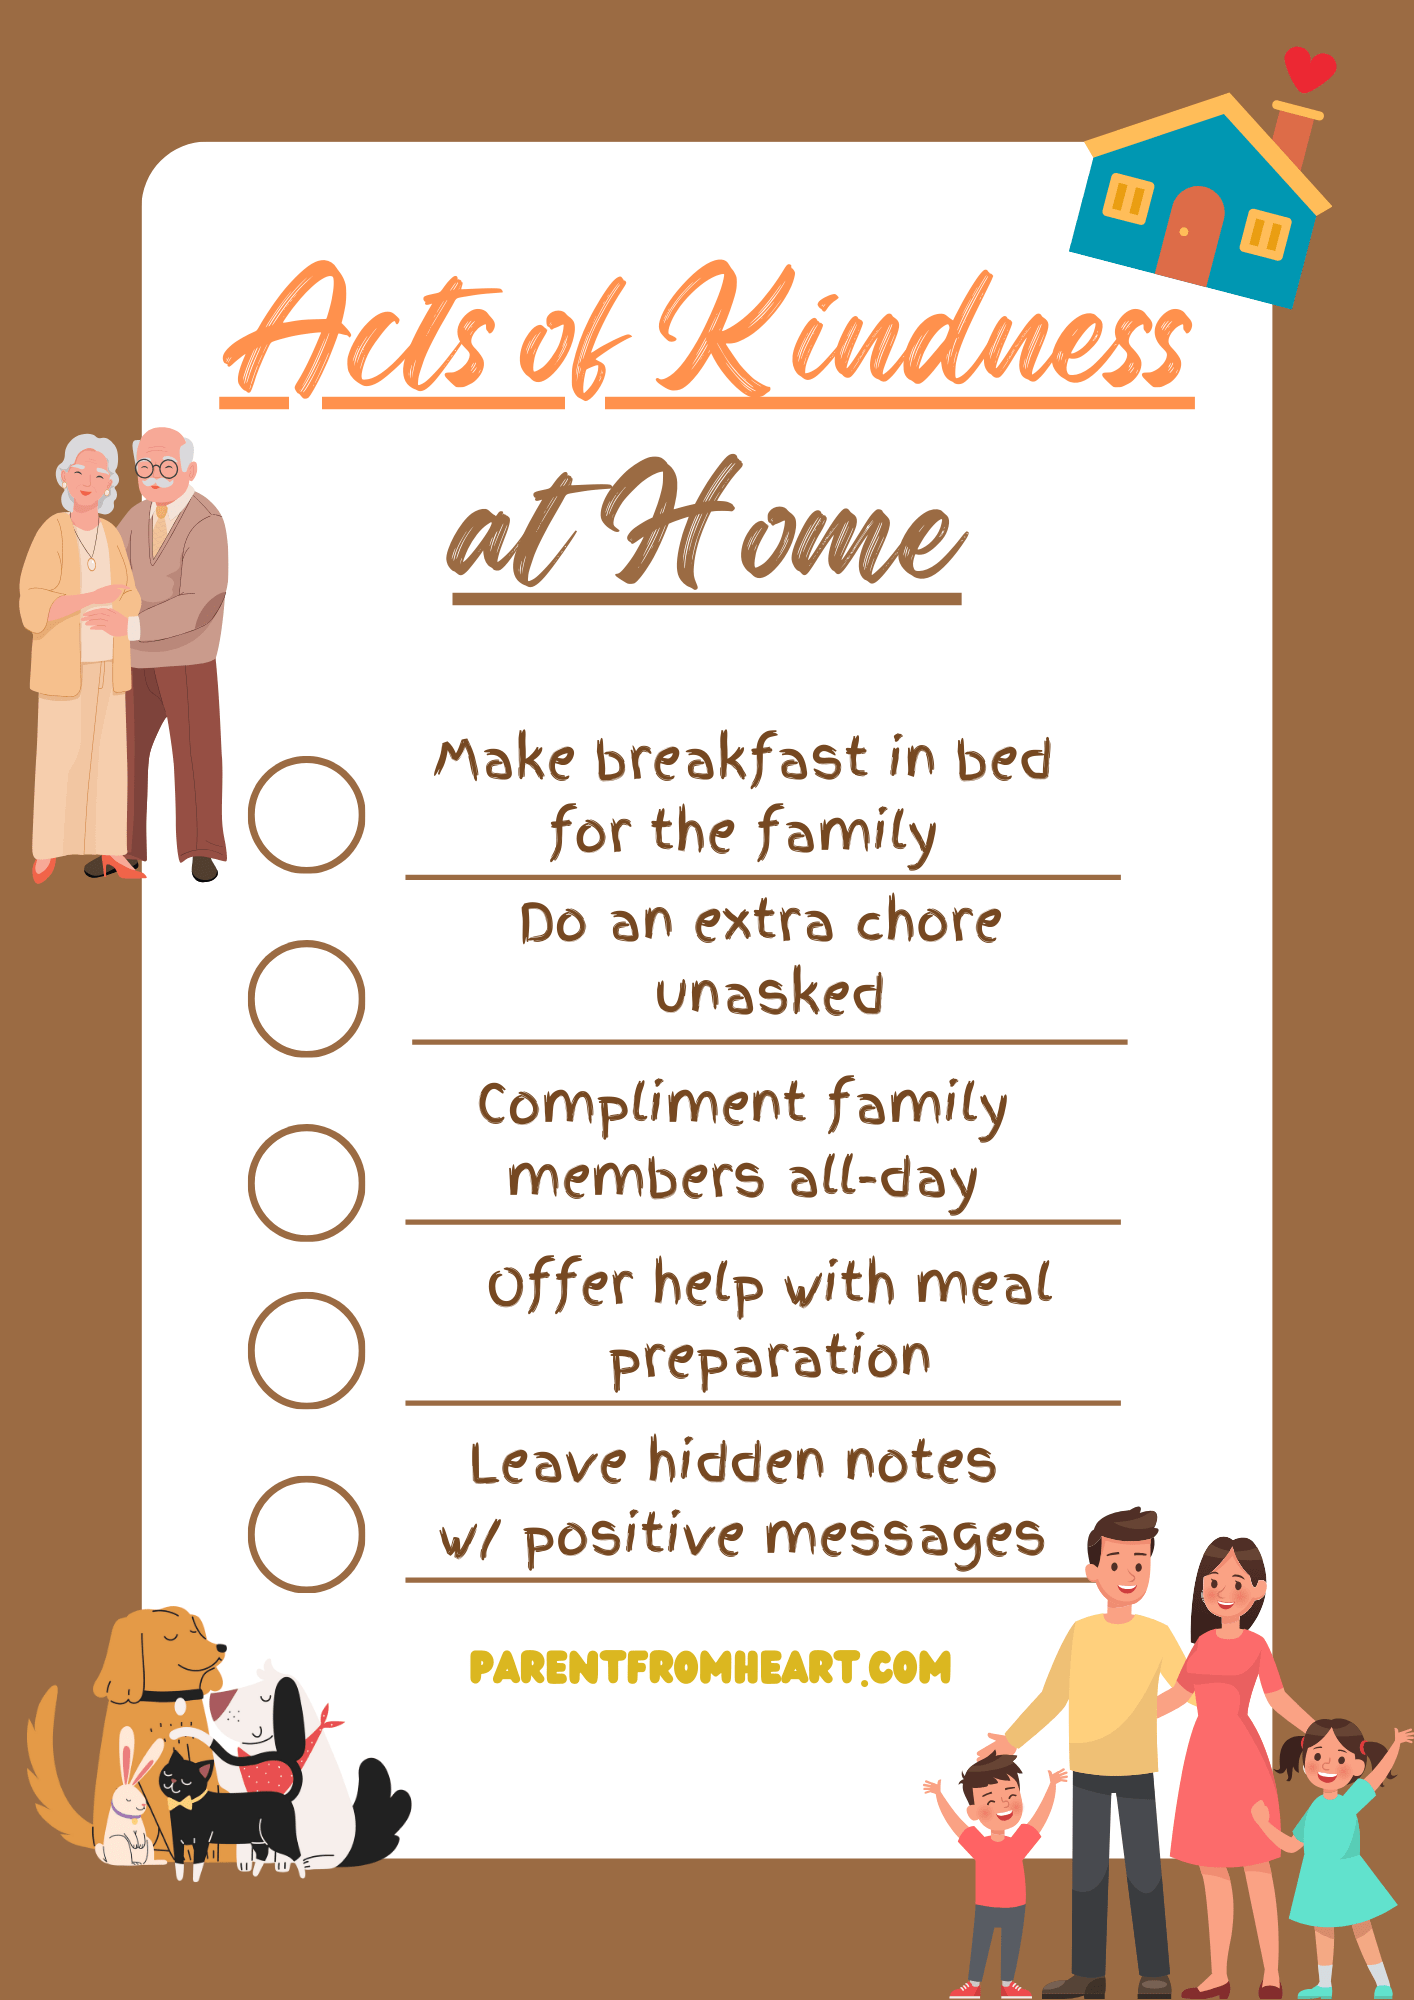 A checklist for kids: Acts of Kindness at Home.